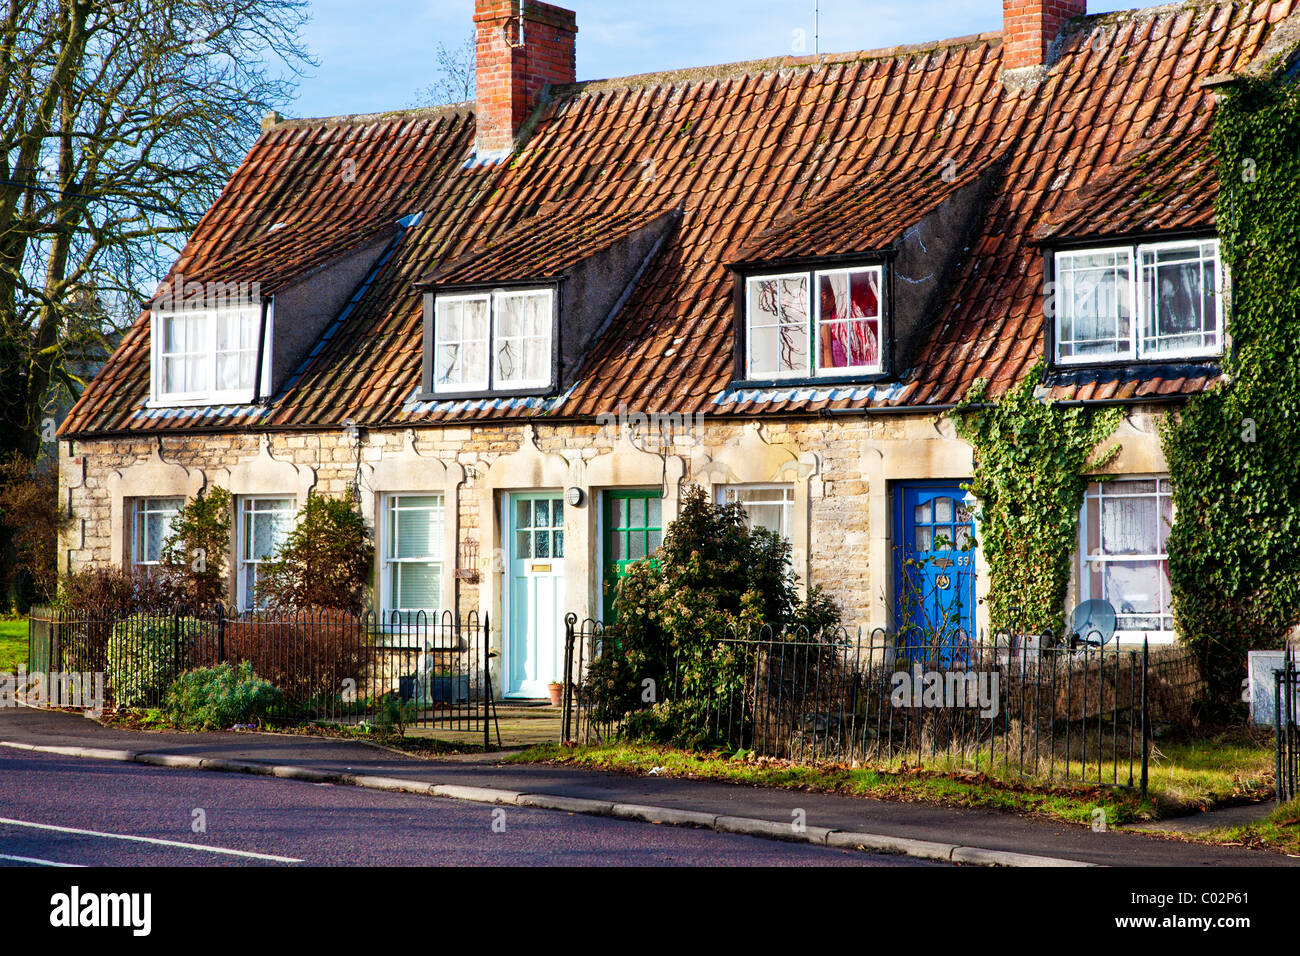 A row of terraced stone cottages with dormer windows and pantile rooves in the village of Holt, Wiltshire, England, UK Stock Photo